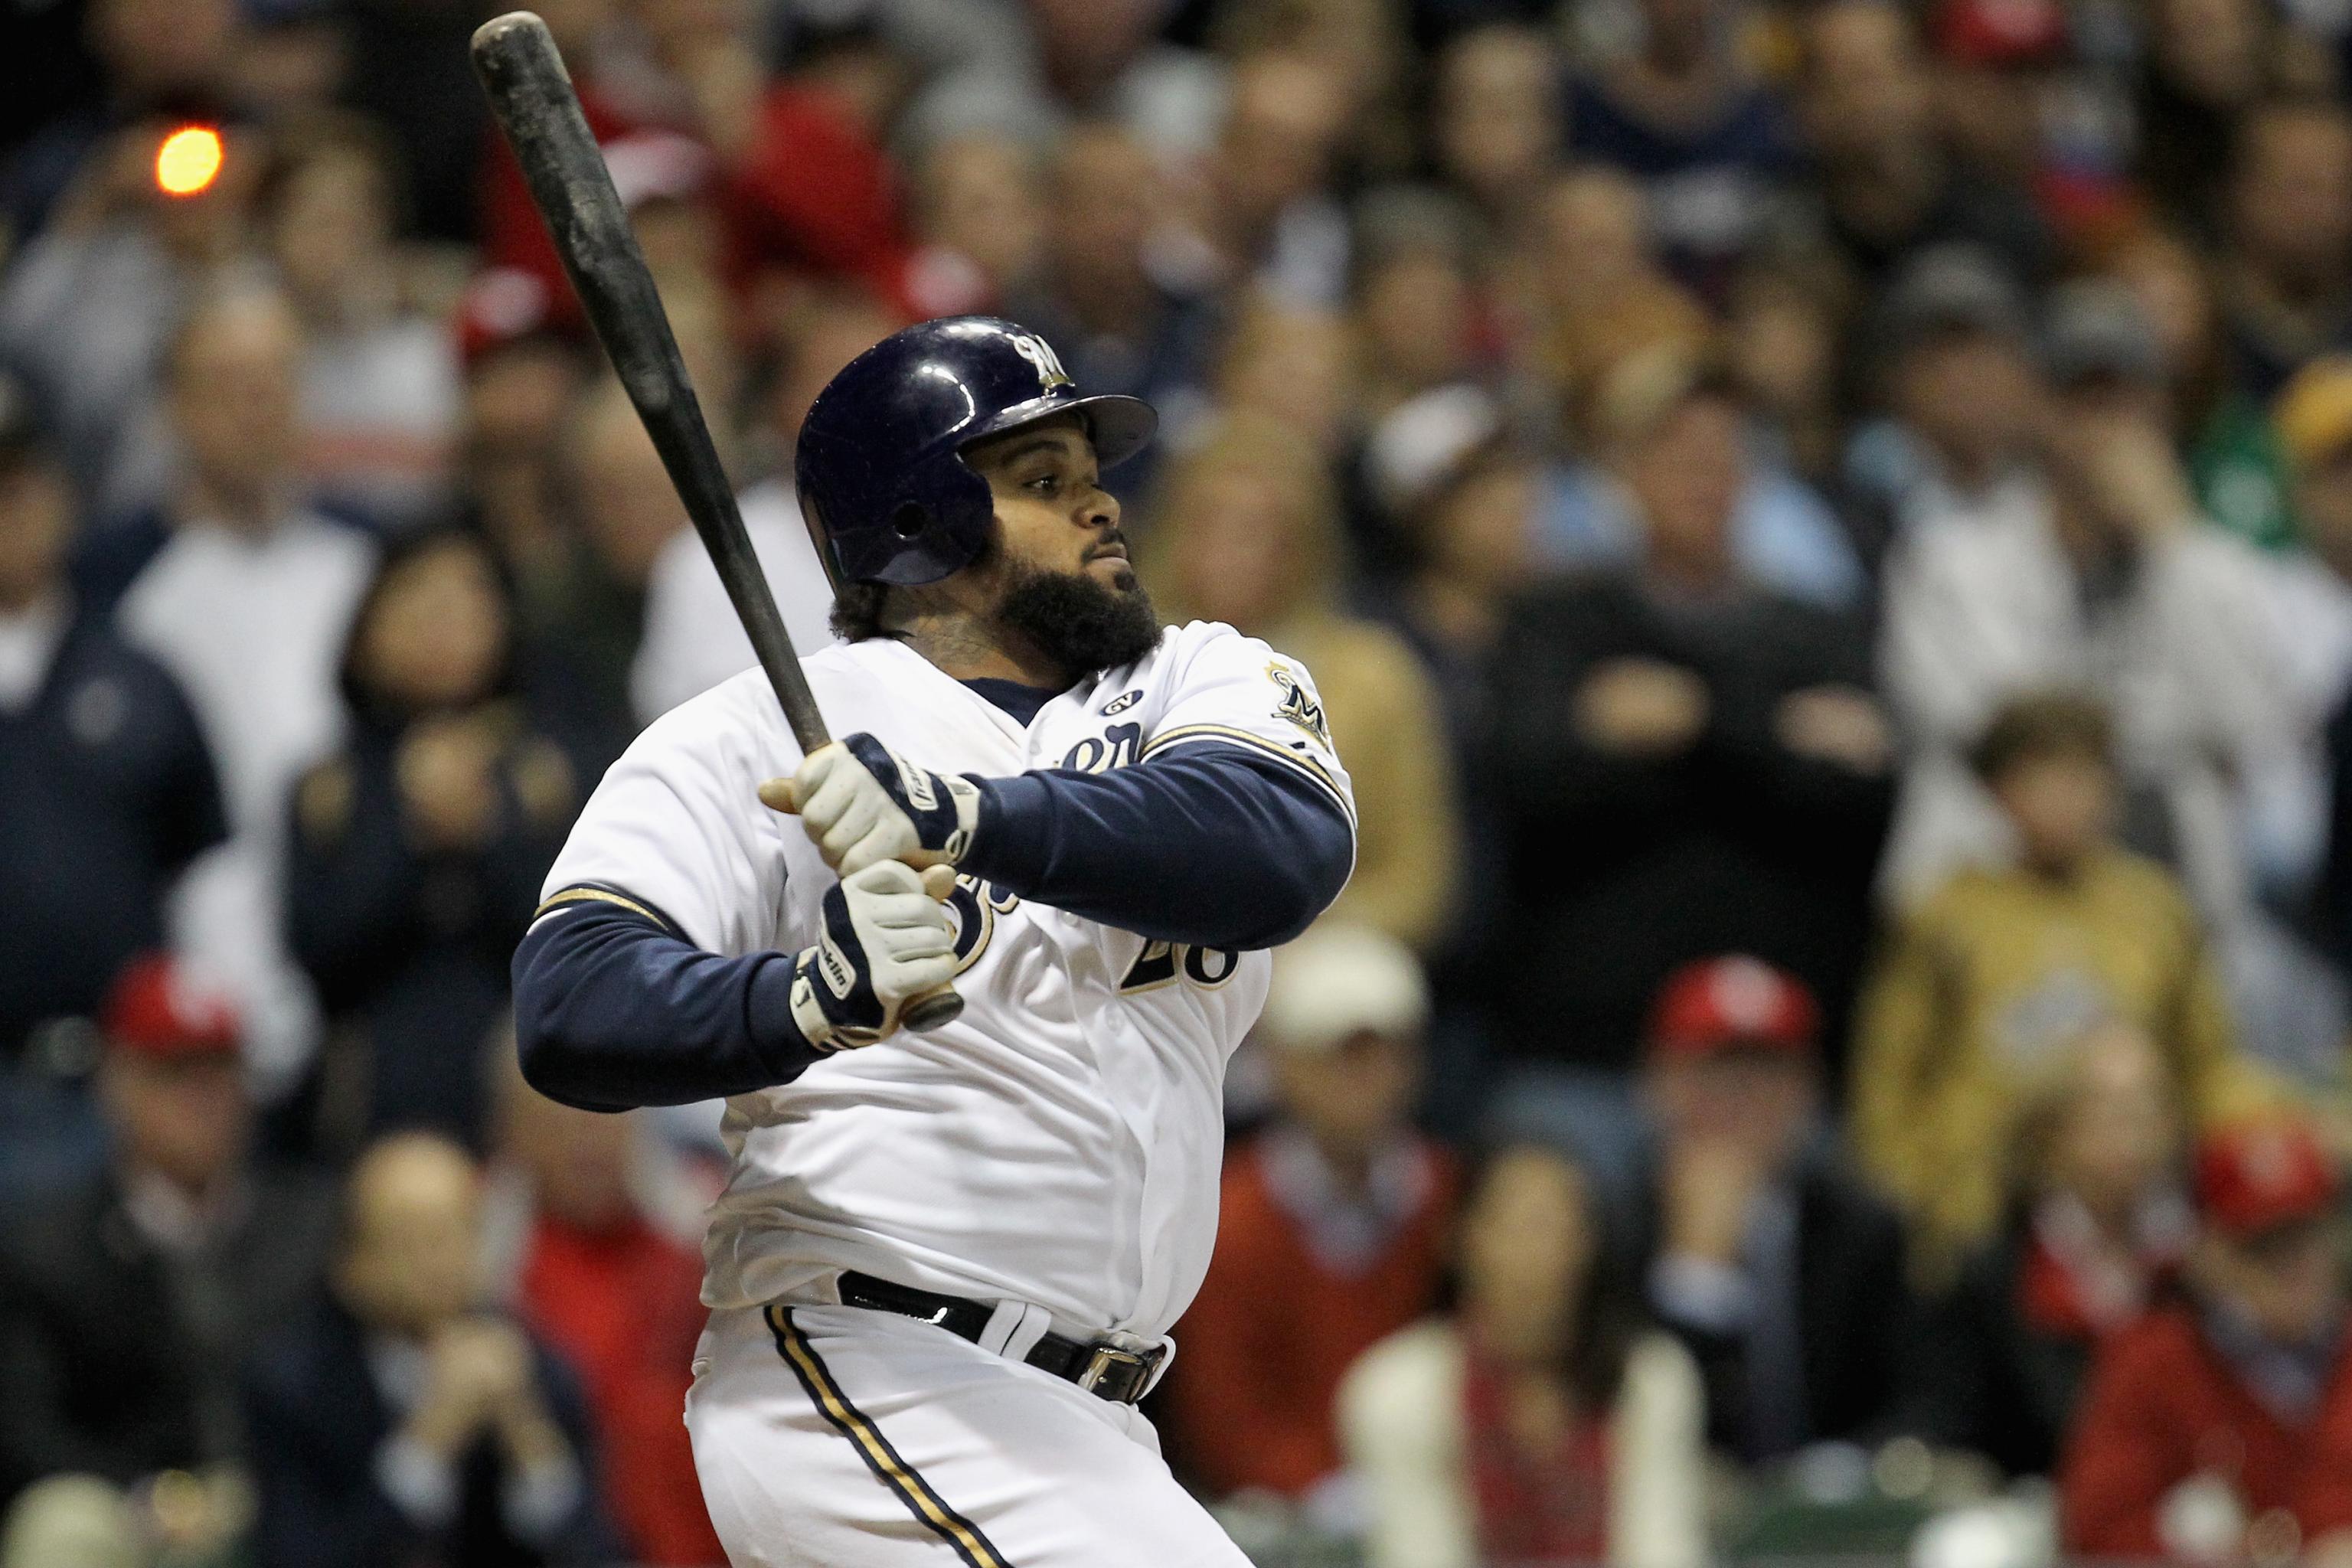 Detroit Tigers thrive while Prince Fielder dives, US sports